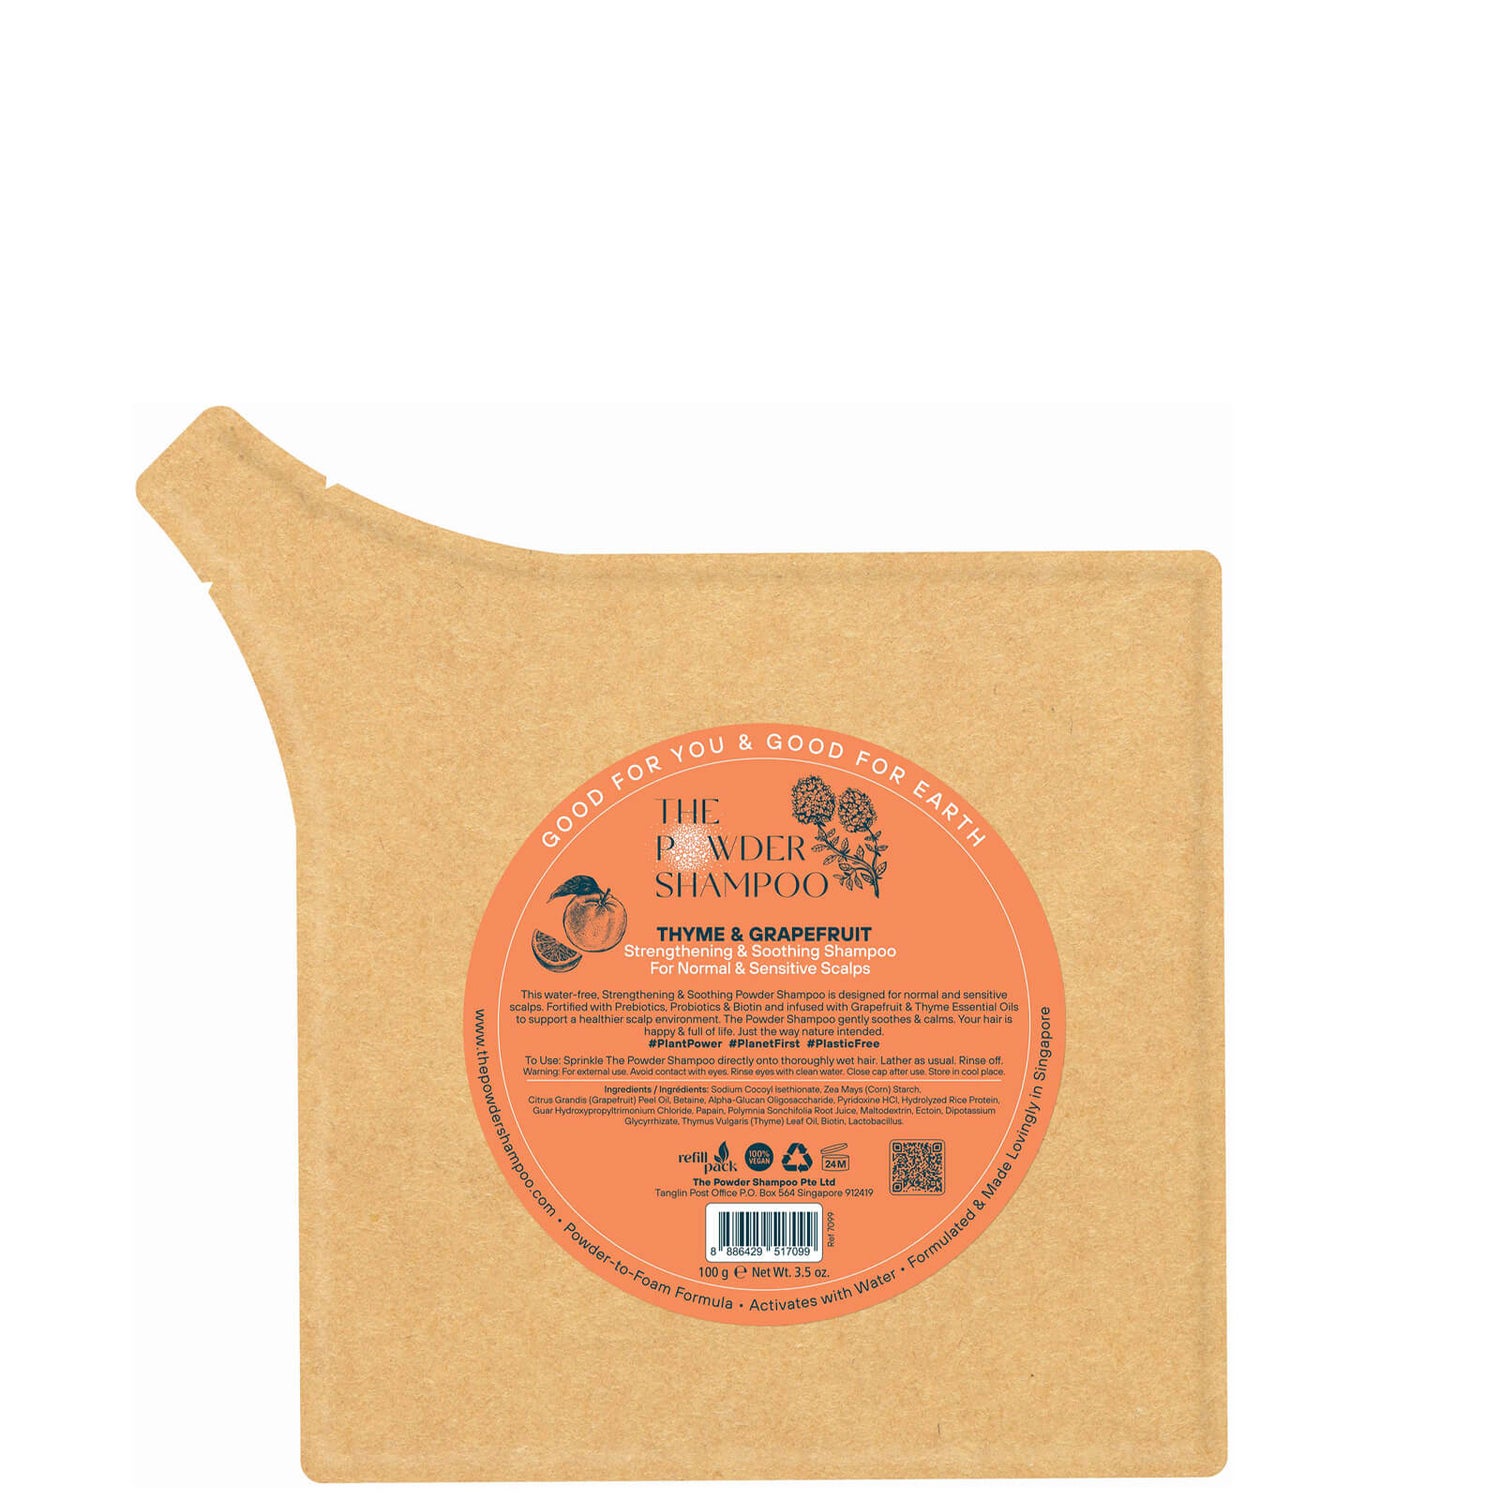 The Powder Shampoo Strengthening & Soothing Shampoo 100g Refill Pack (Thyme & Grapefruit)